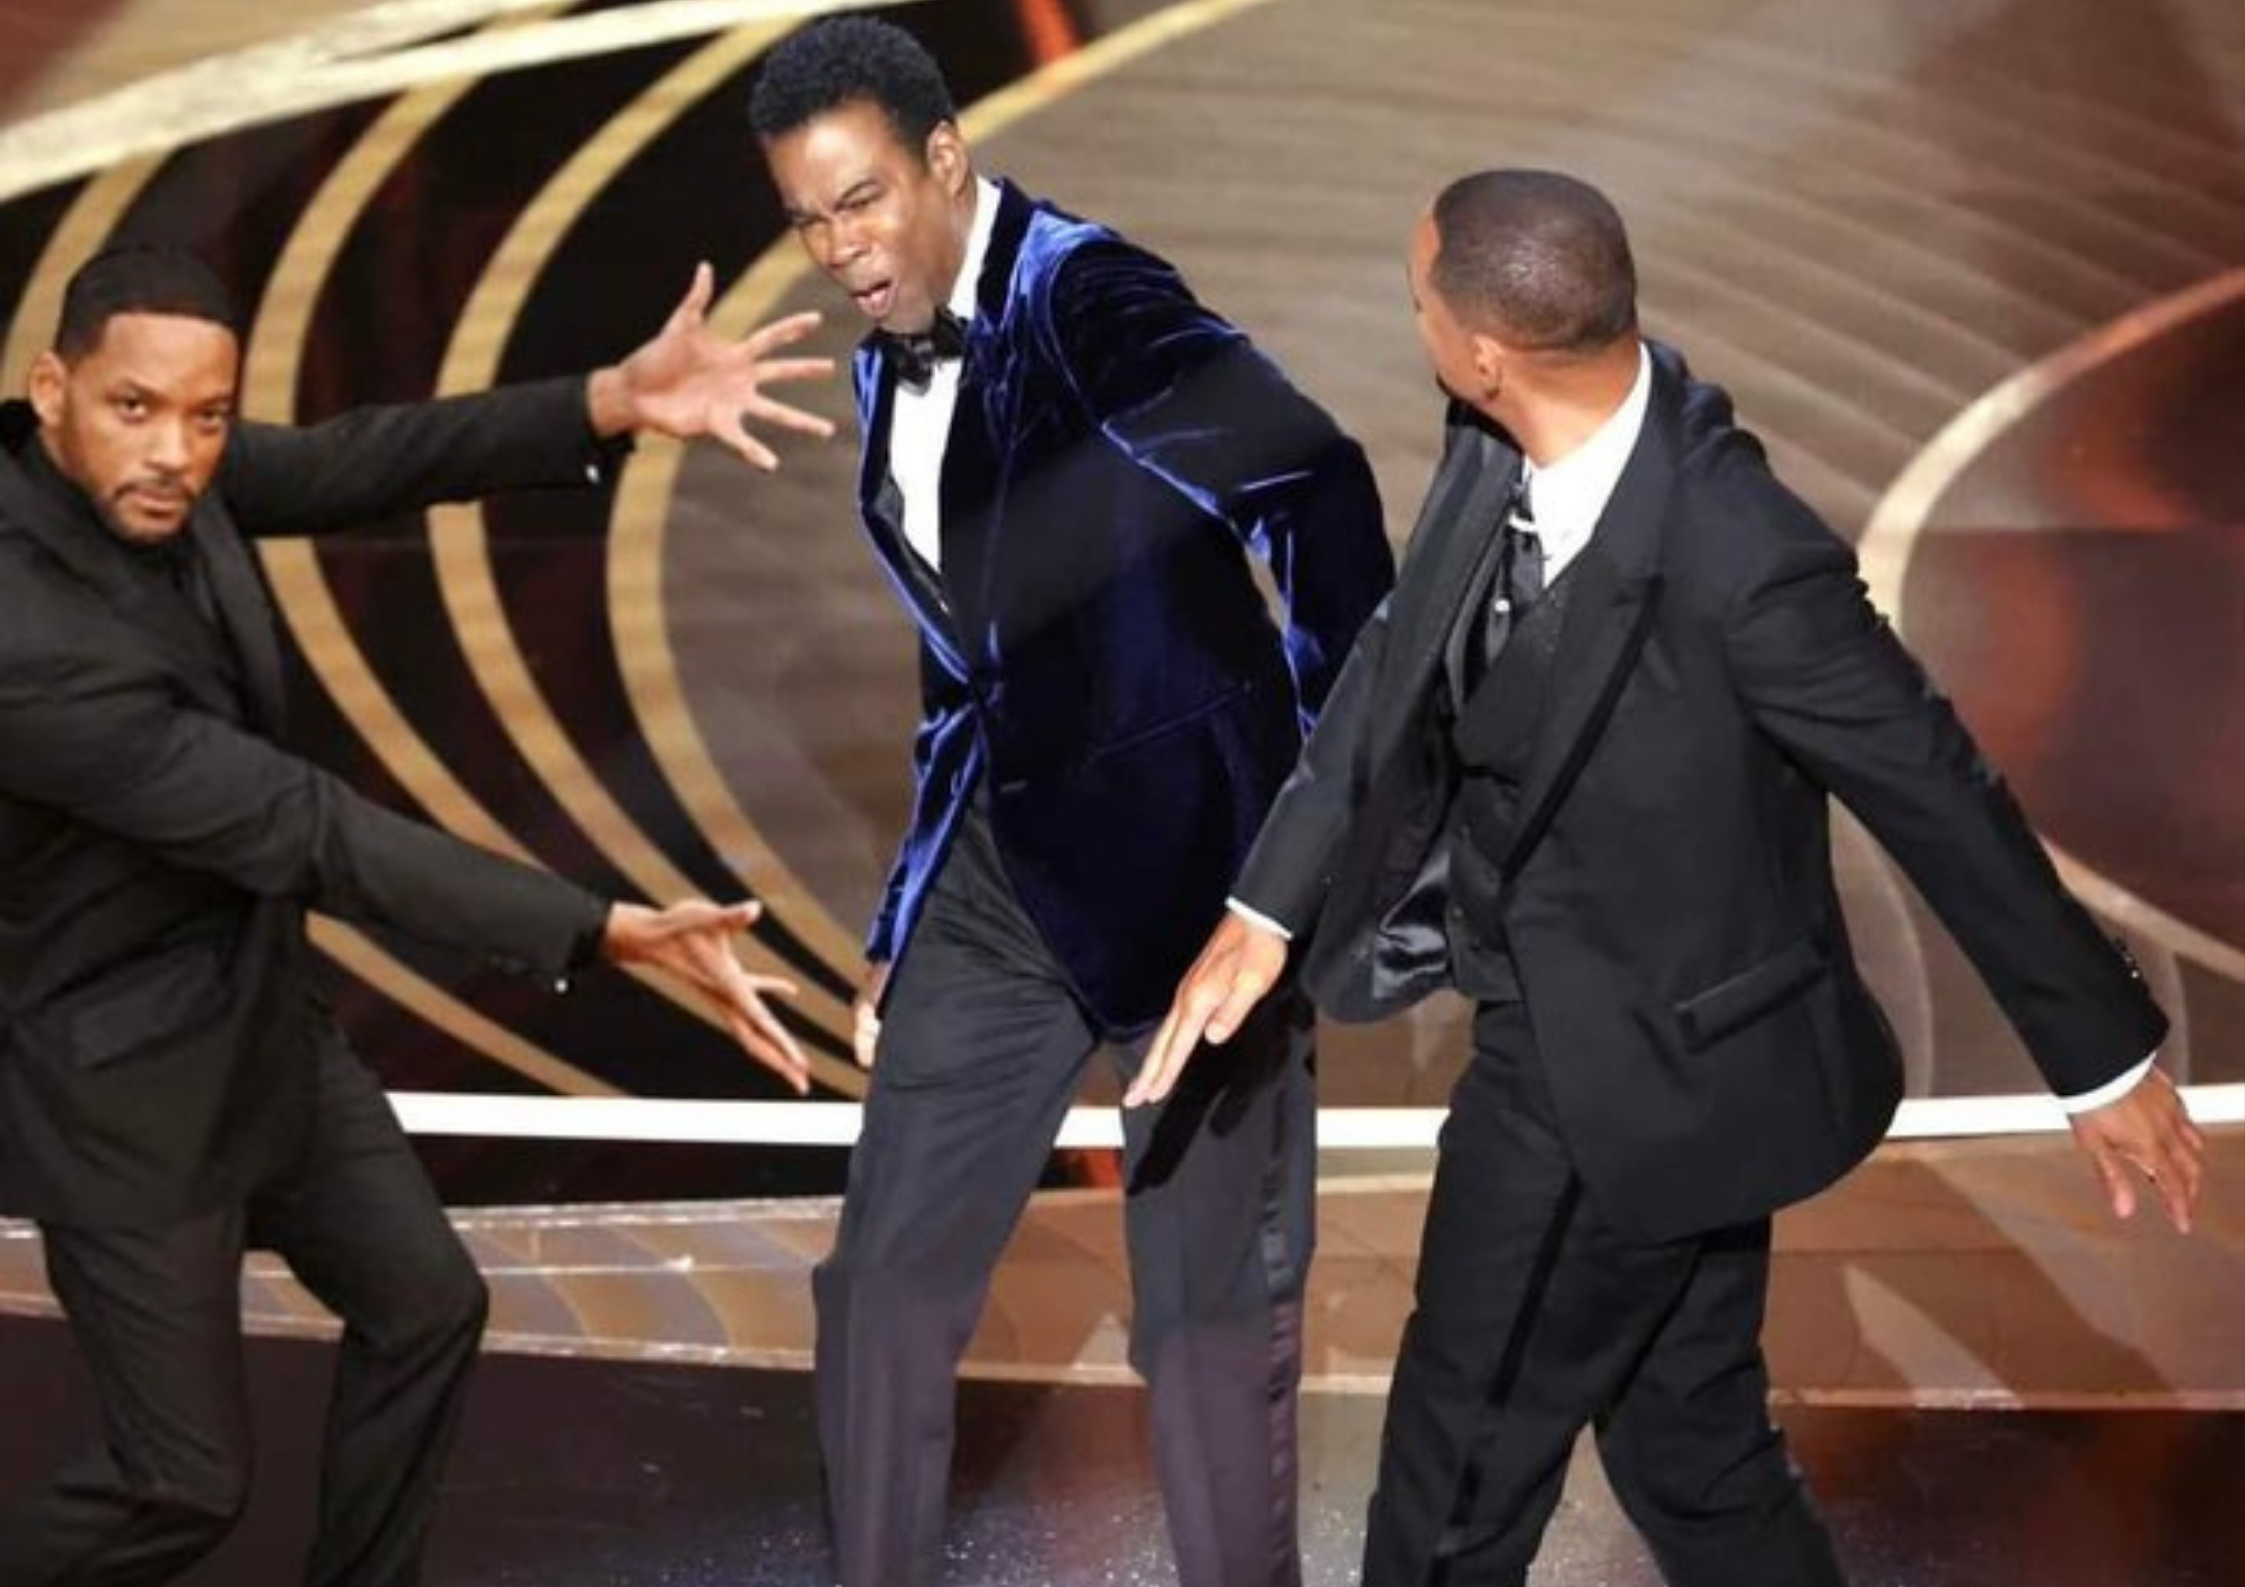 Will smith arms spread open to show off another him slapping chris rock